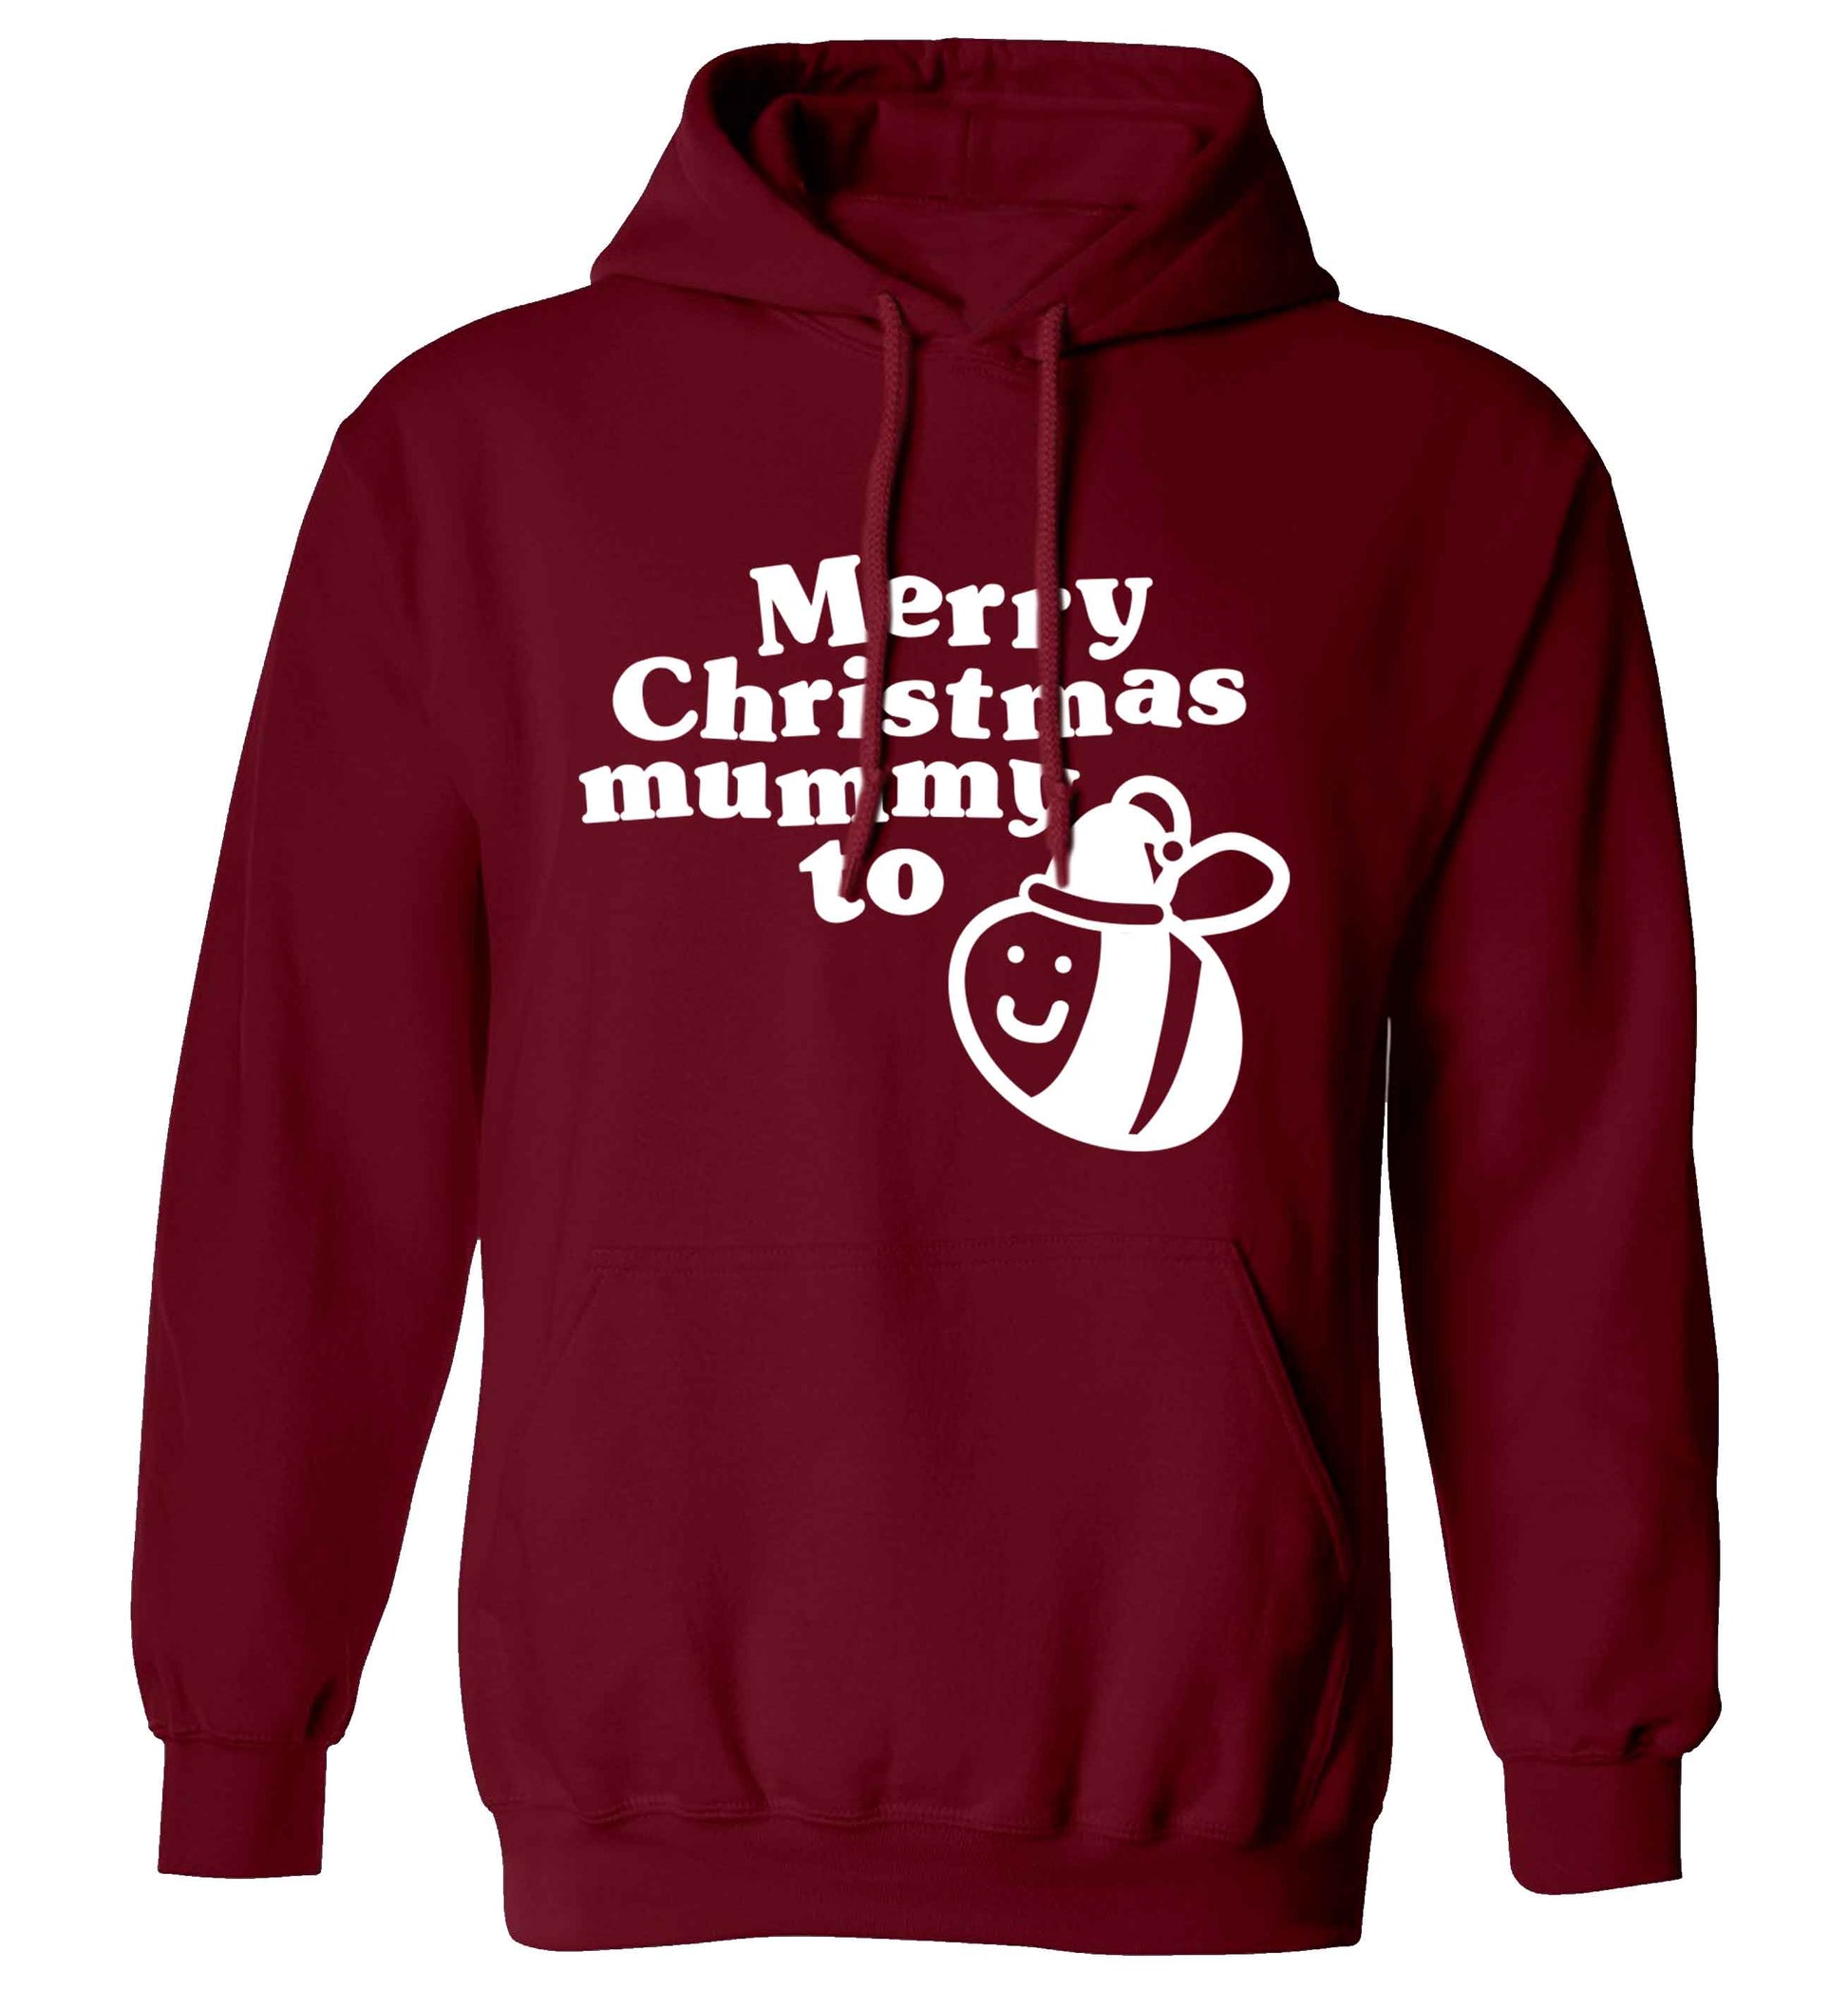 Merry Christmas mummy to be adults unisex maroon hoodie 2XL